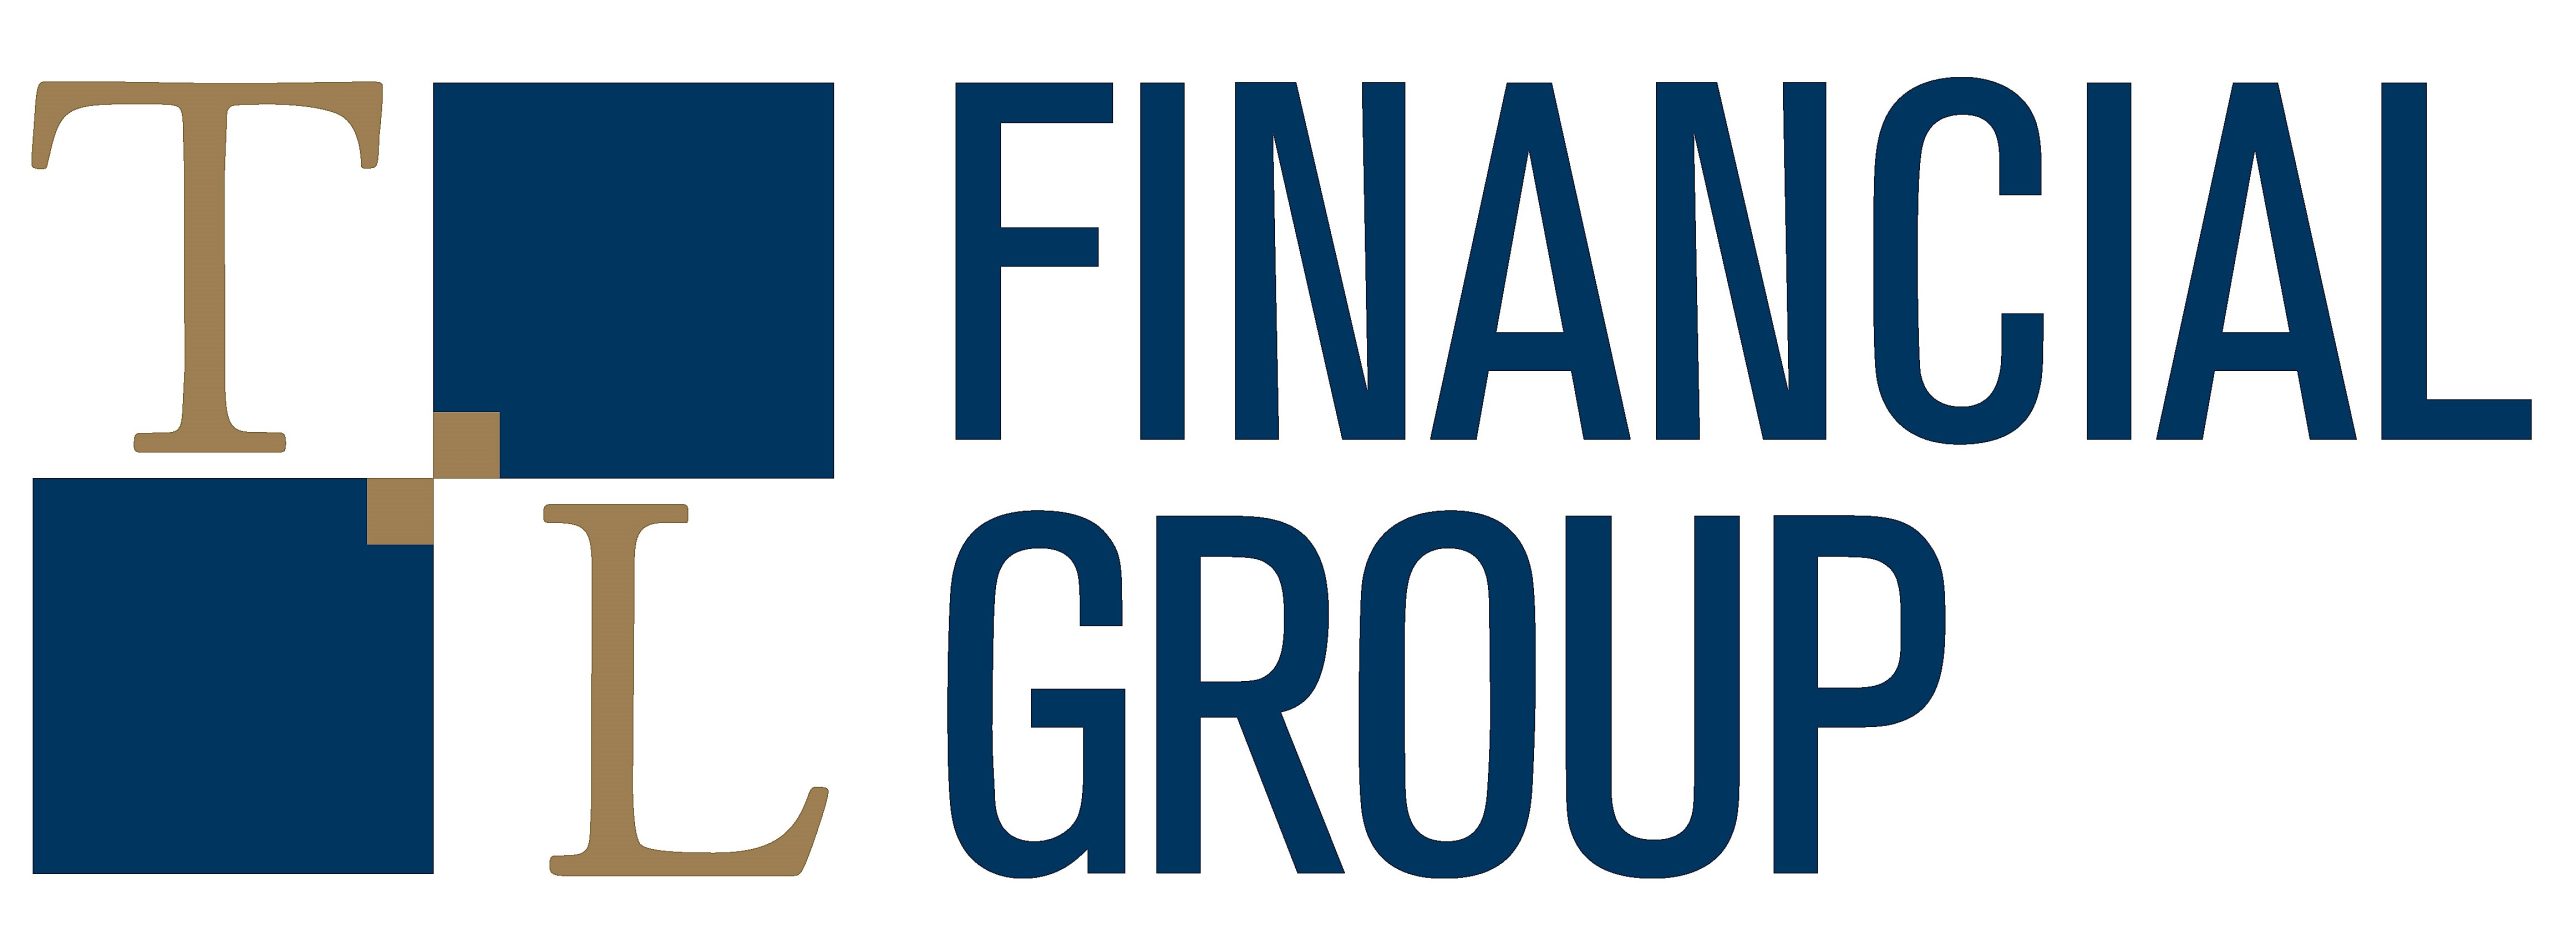 2021 TL Financial Group